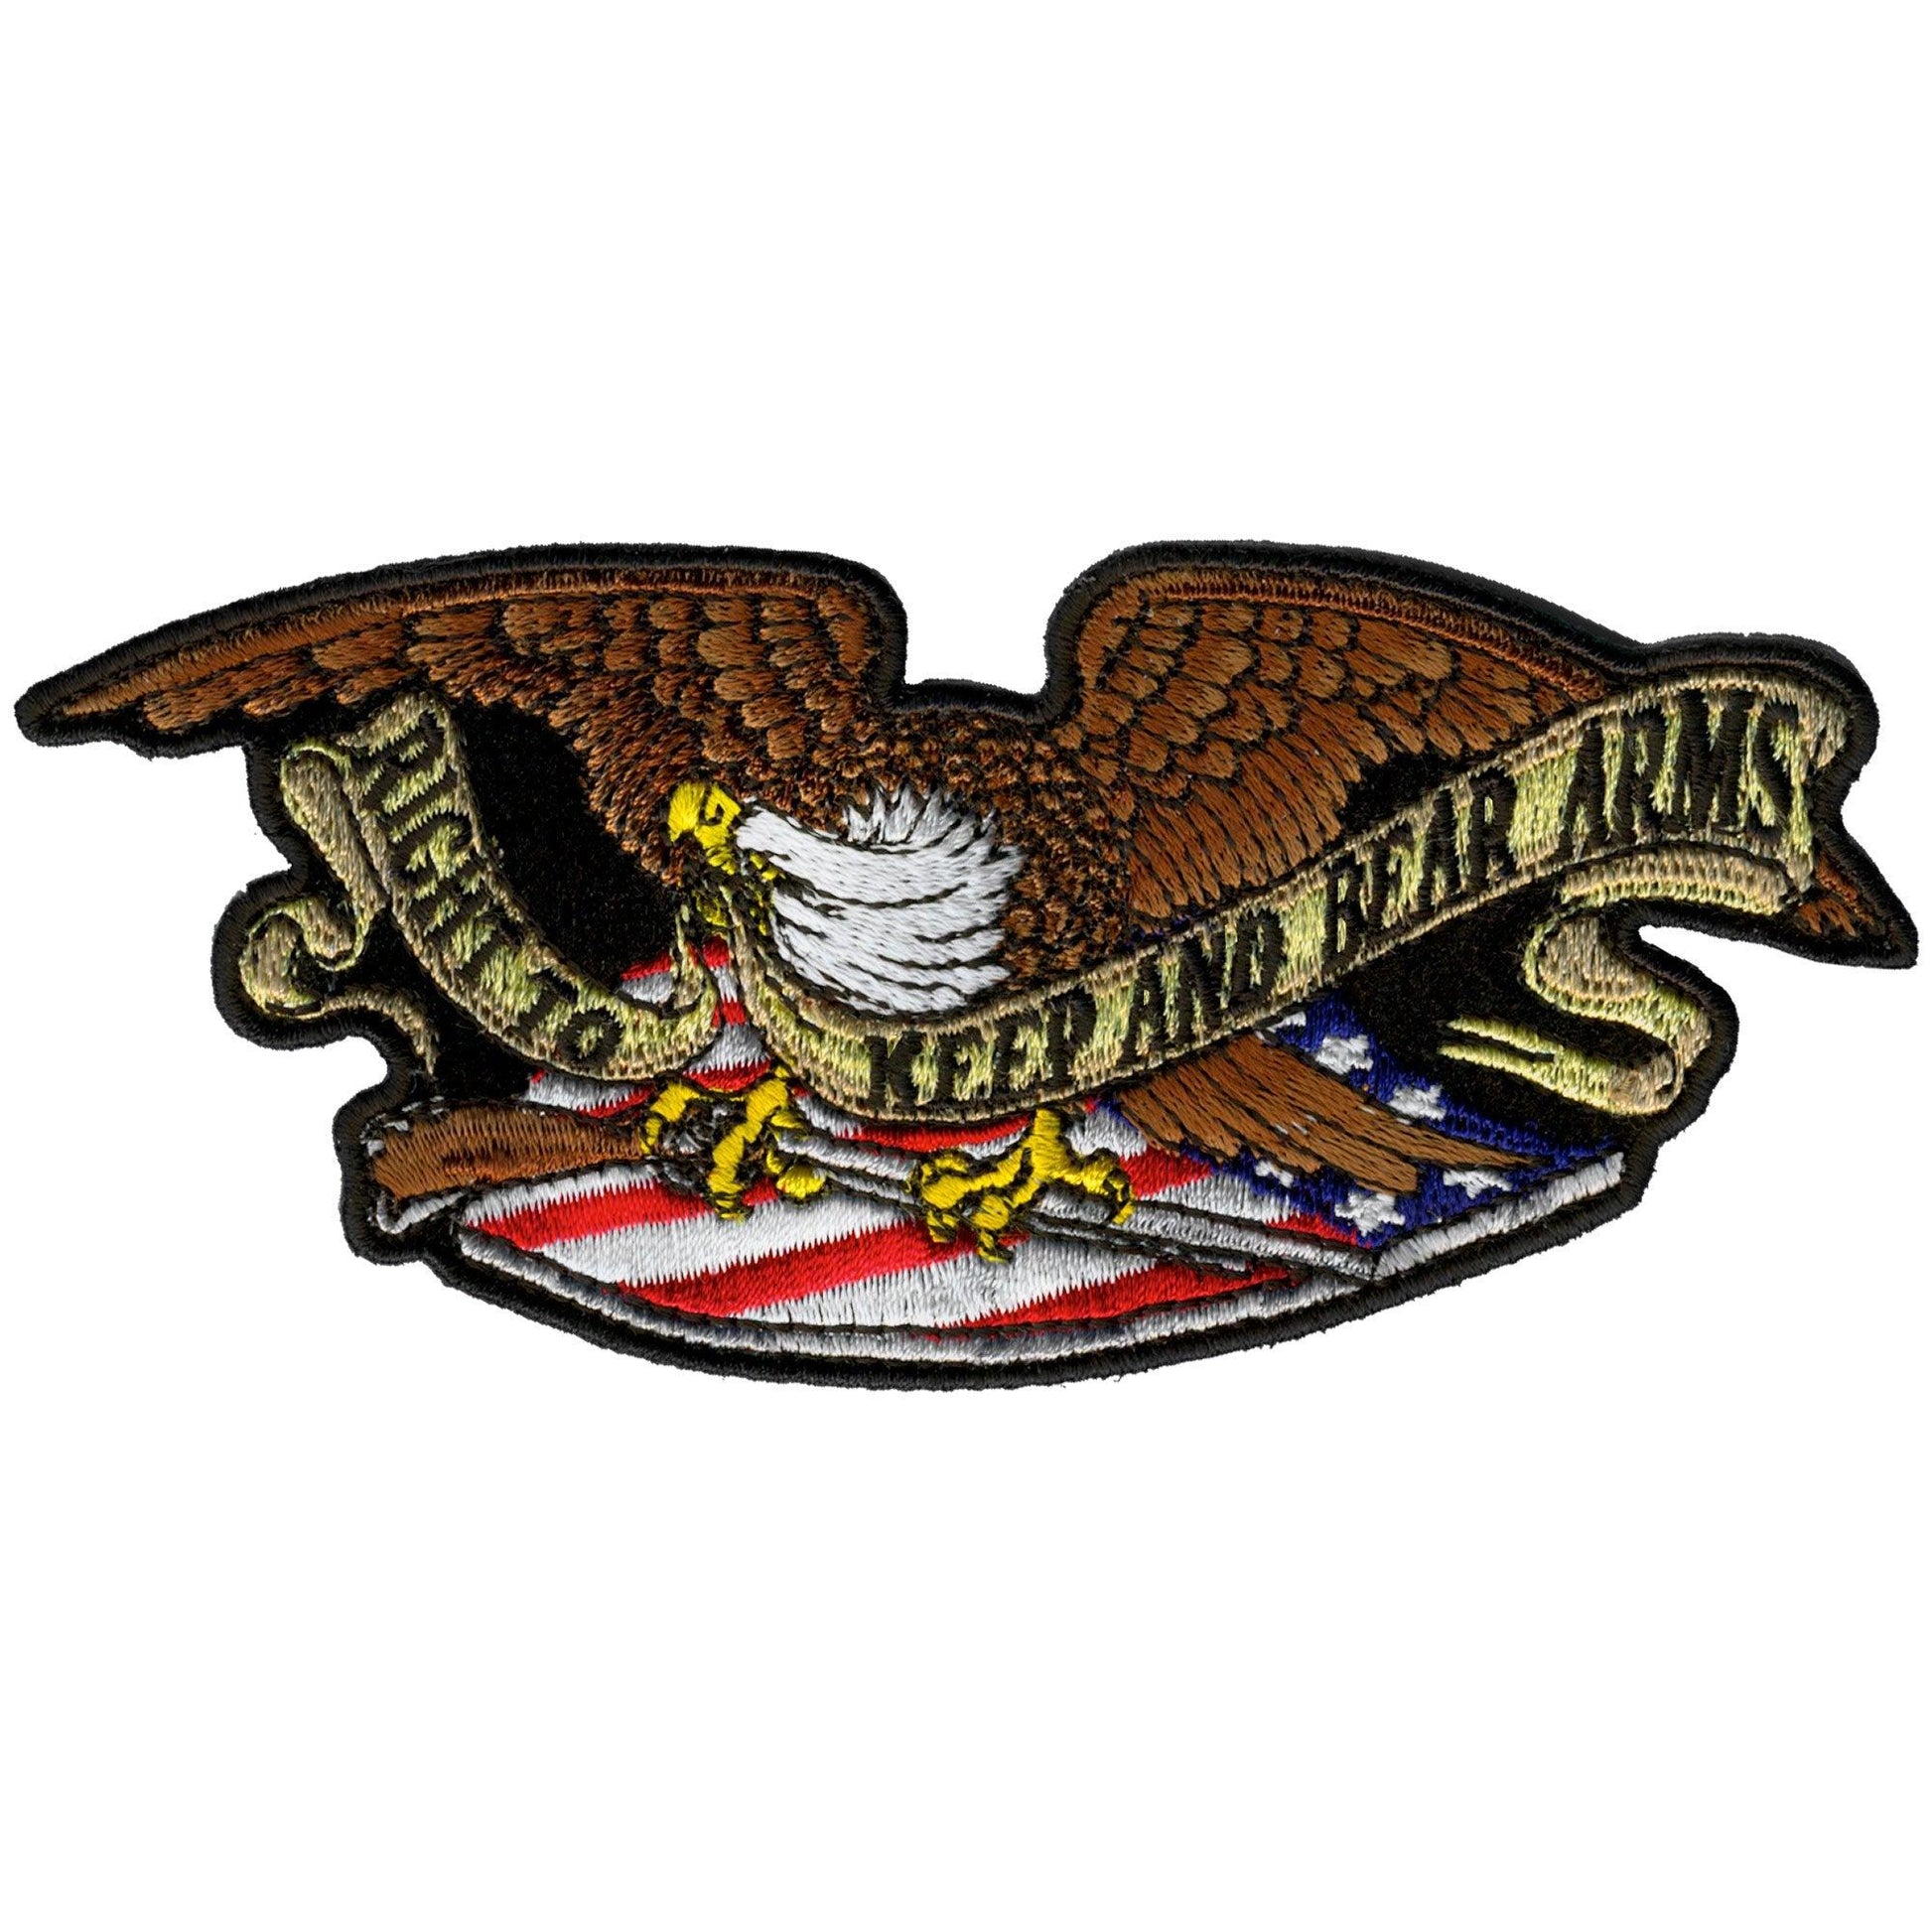 Armed Eagle 5" x 2" Patch - Military Republic